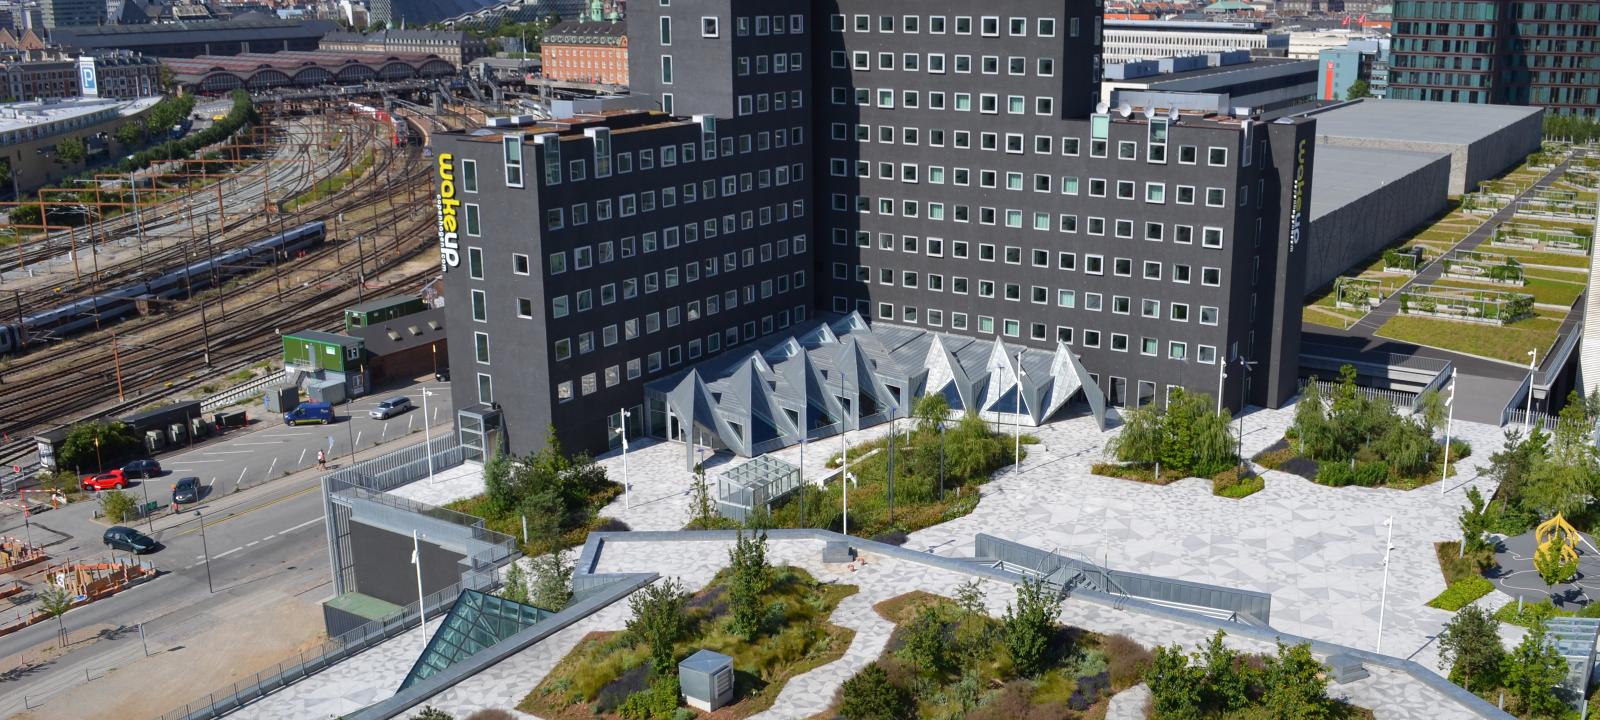 Green roof with walkways and plant beds in the city